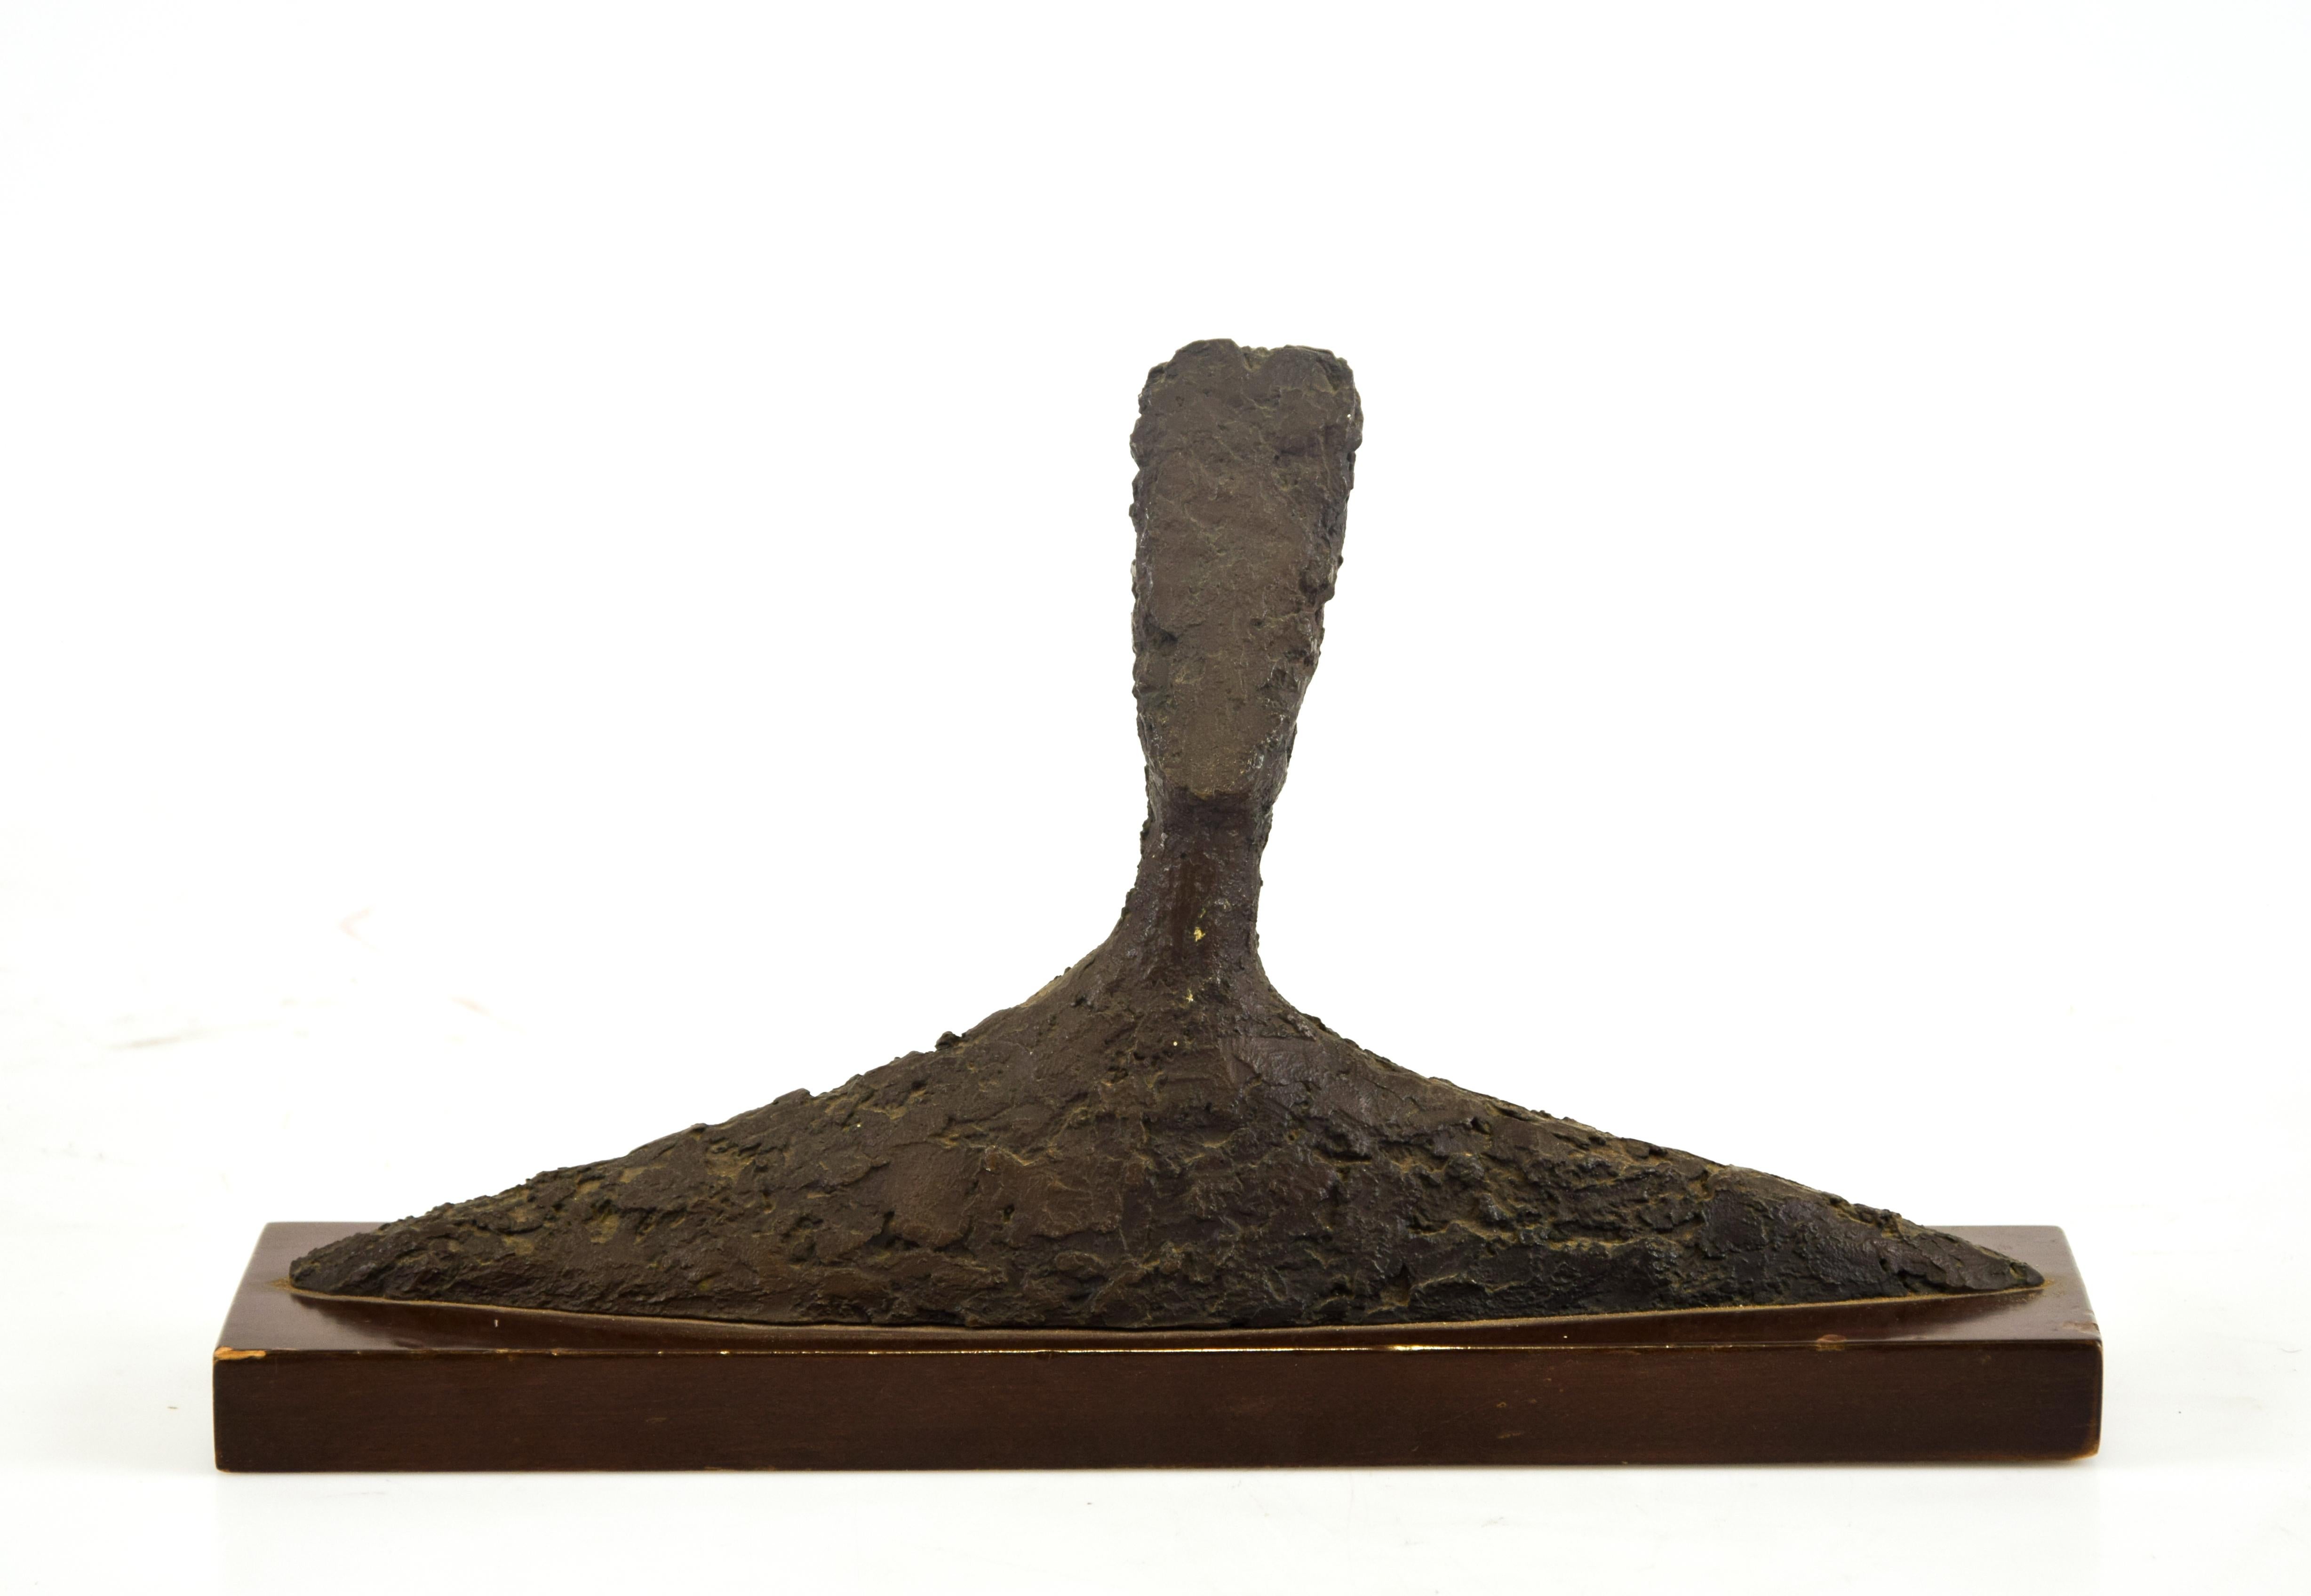 Conceptual Sculpture is a contemporary sculpture realized in the 20th century.

Bronze sculpture signed Bestetti on the back.
The sculpture is mounted on a wooden base. 

This object is shipped from Italy. Under existing legislation, any object